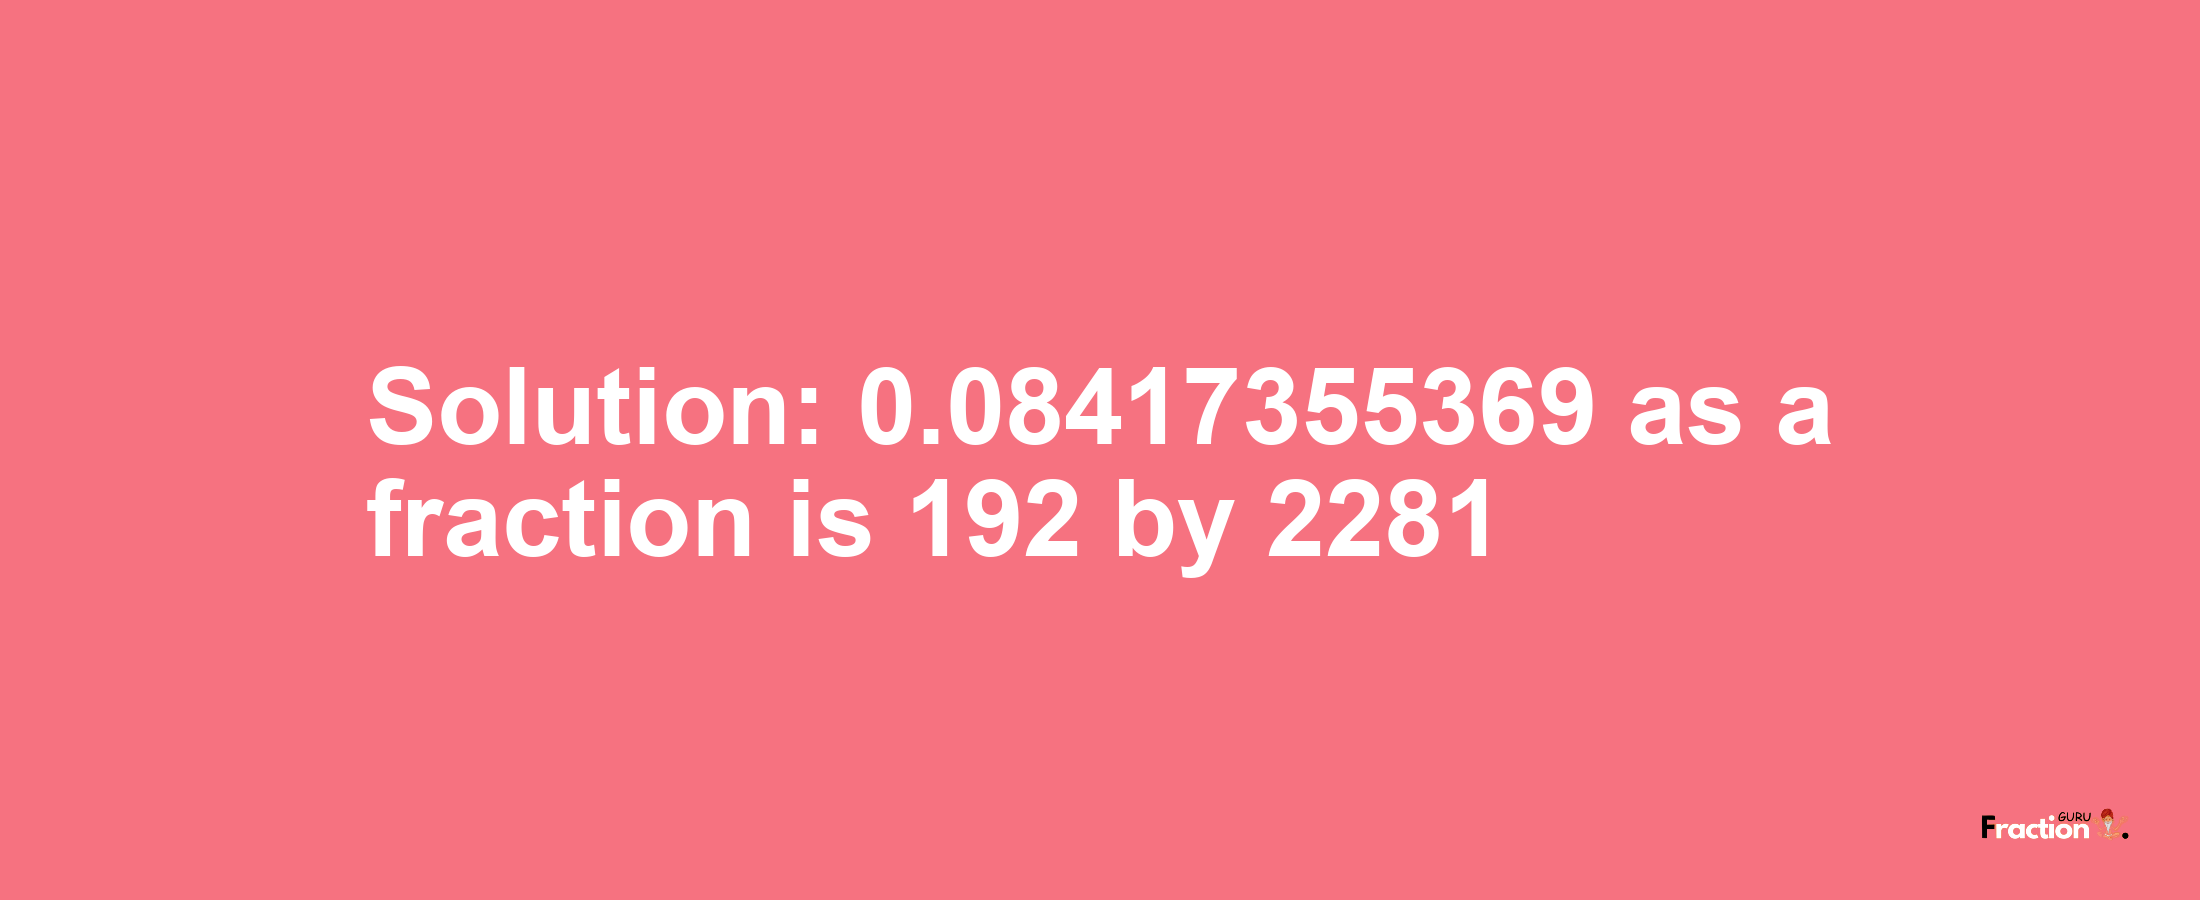 Solution:0.08417355369 as a fraction is 192/2281